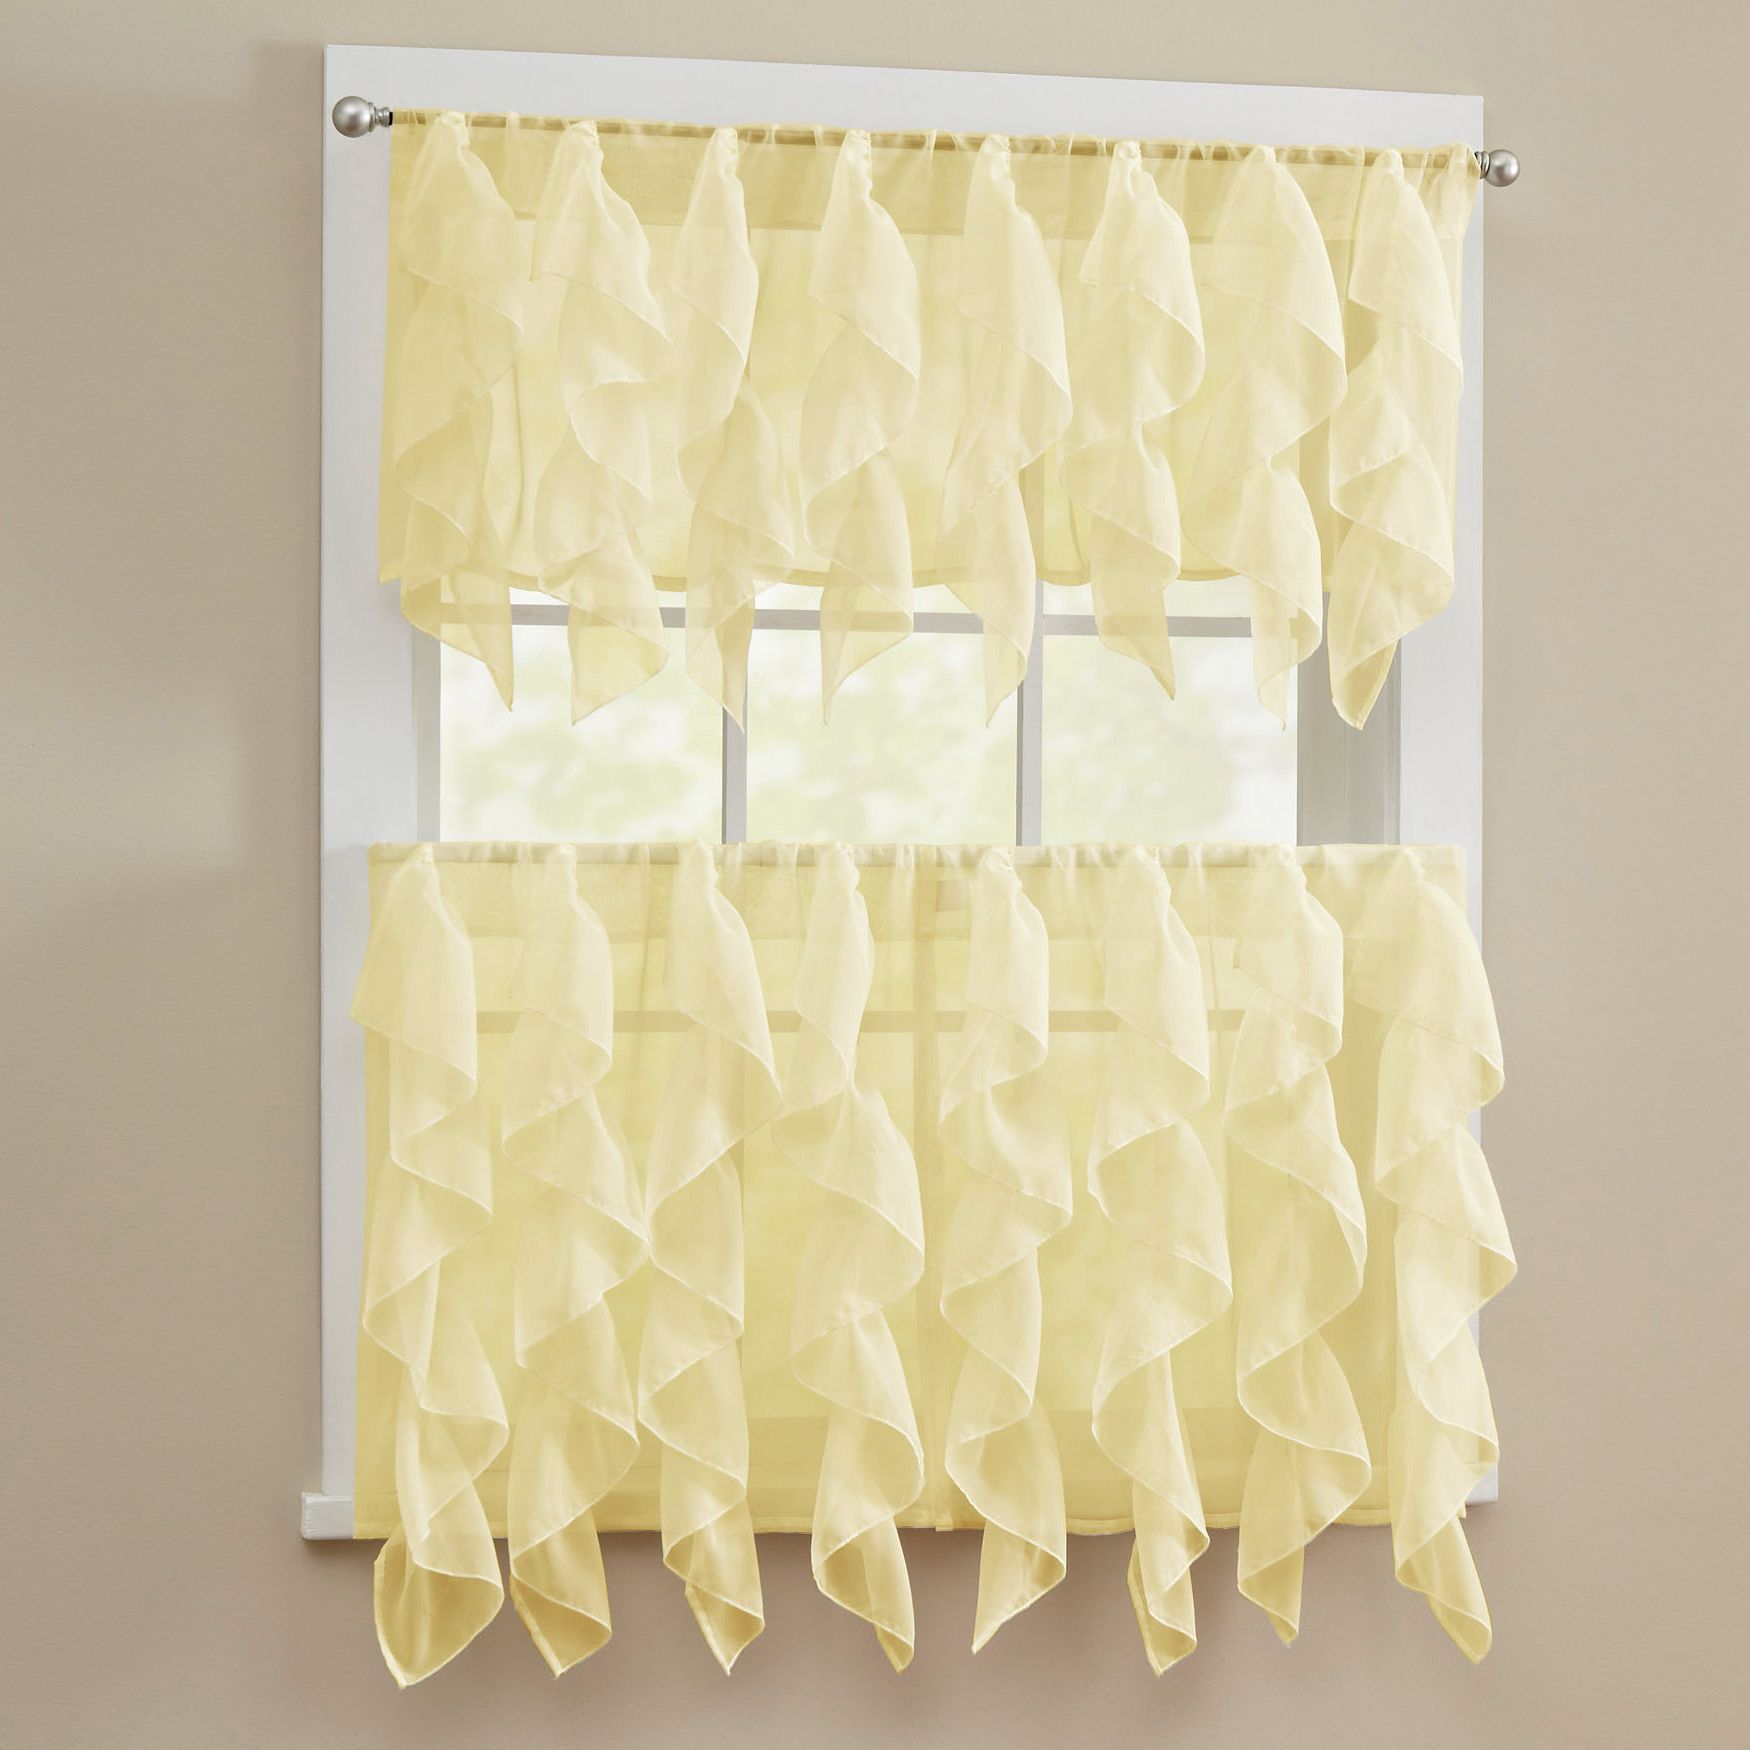 Details About Sheer Voile Vertical Ruffle Window Kitchen Curtain Tiers Or  Valance Maize Inside Kitchen Curtain Tiers (View 16 of 20)